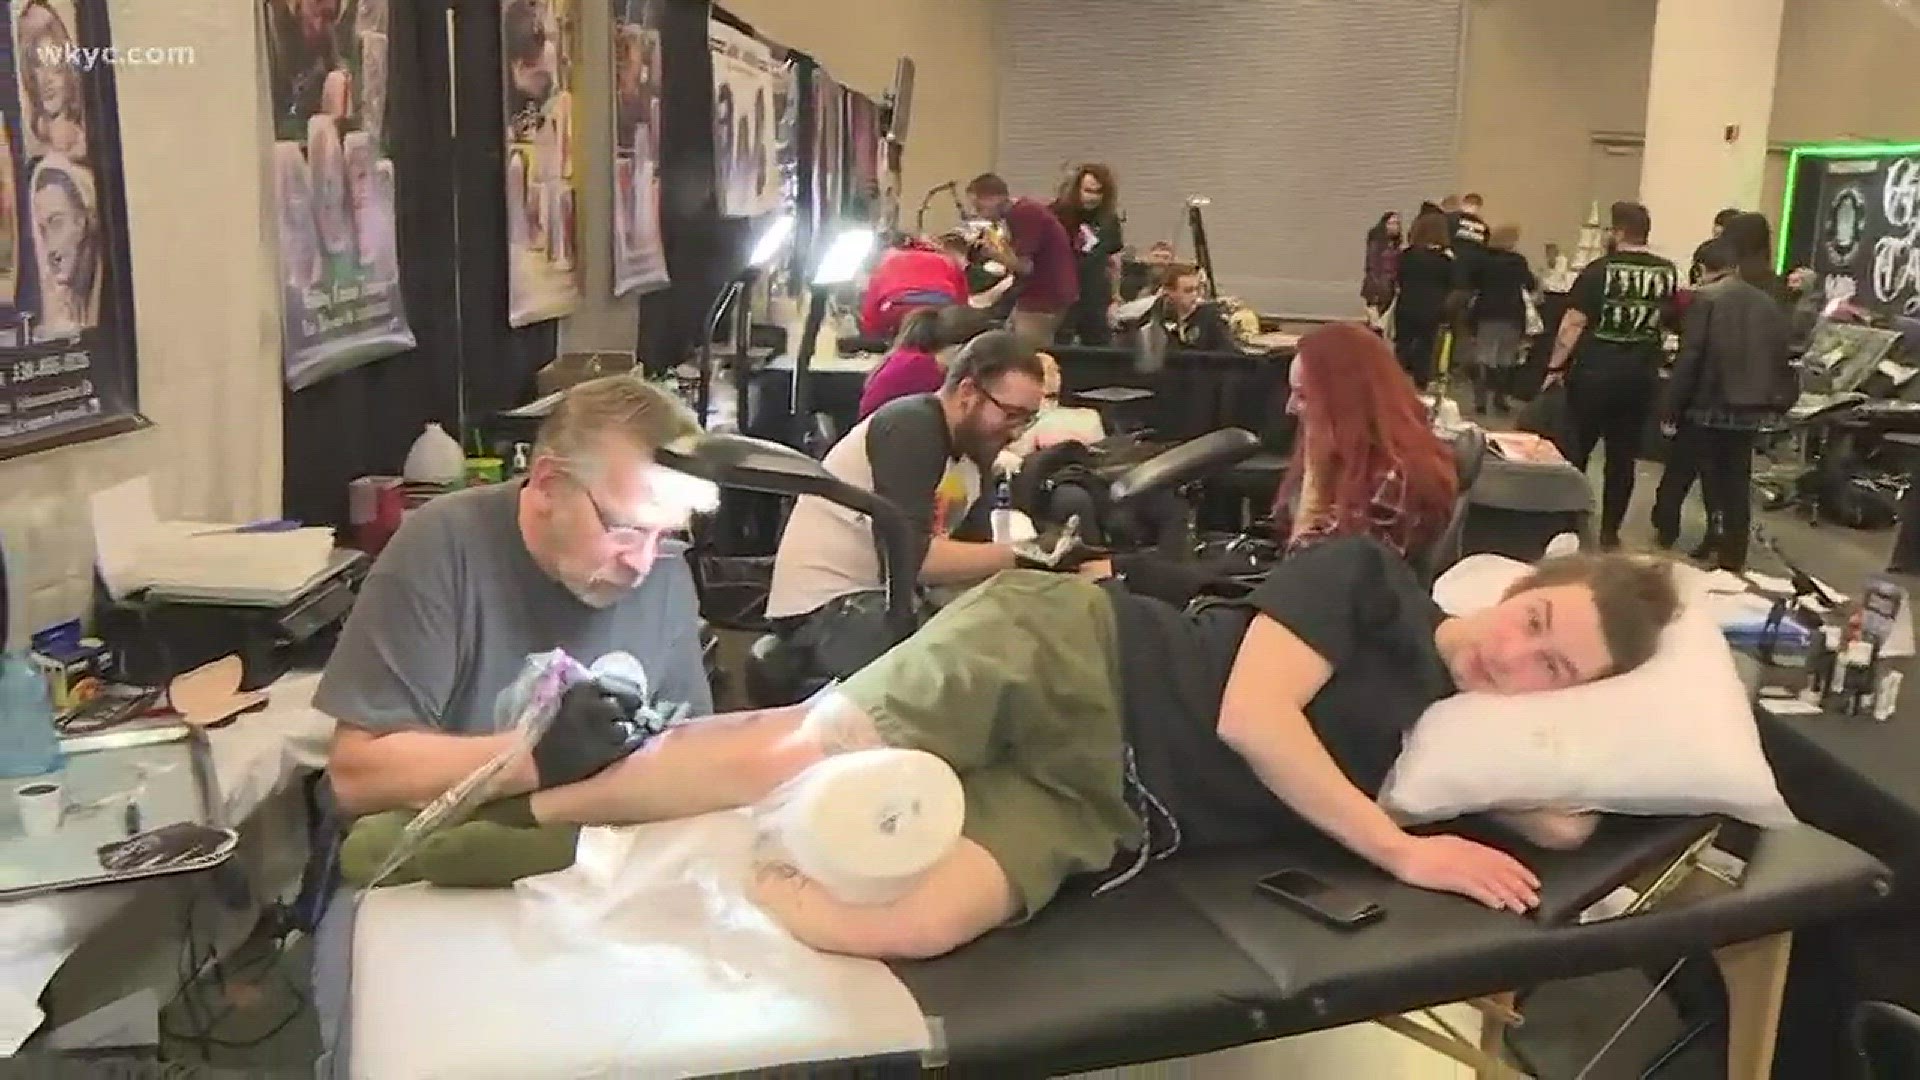 Cleveland hosting tattoo arts convention